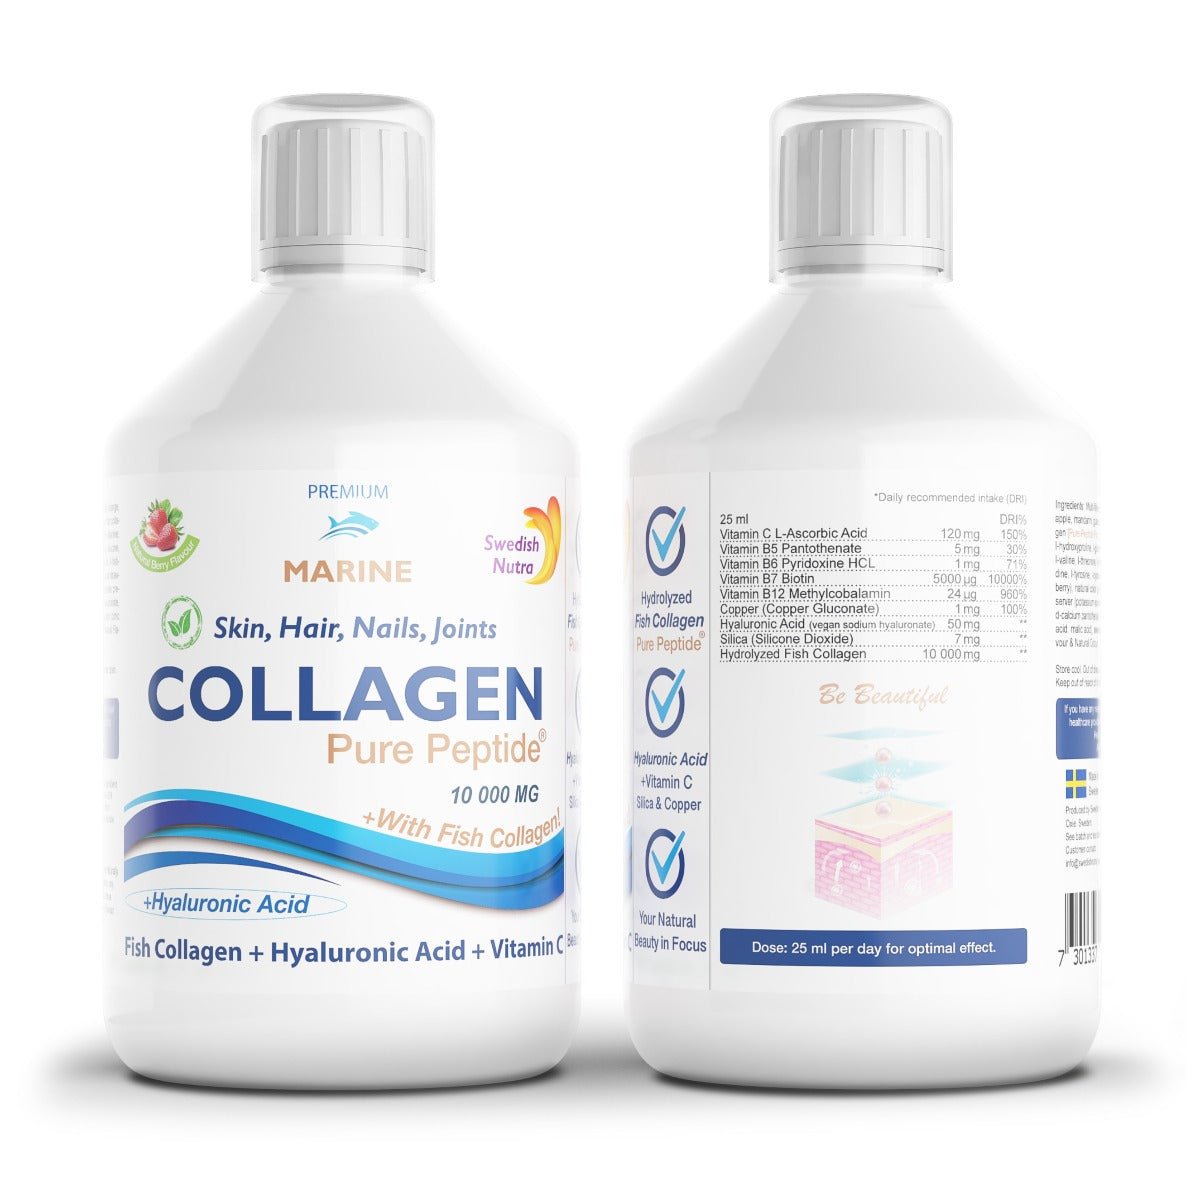 Swedish Nutra Marine Collagen Front and Back